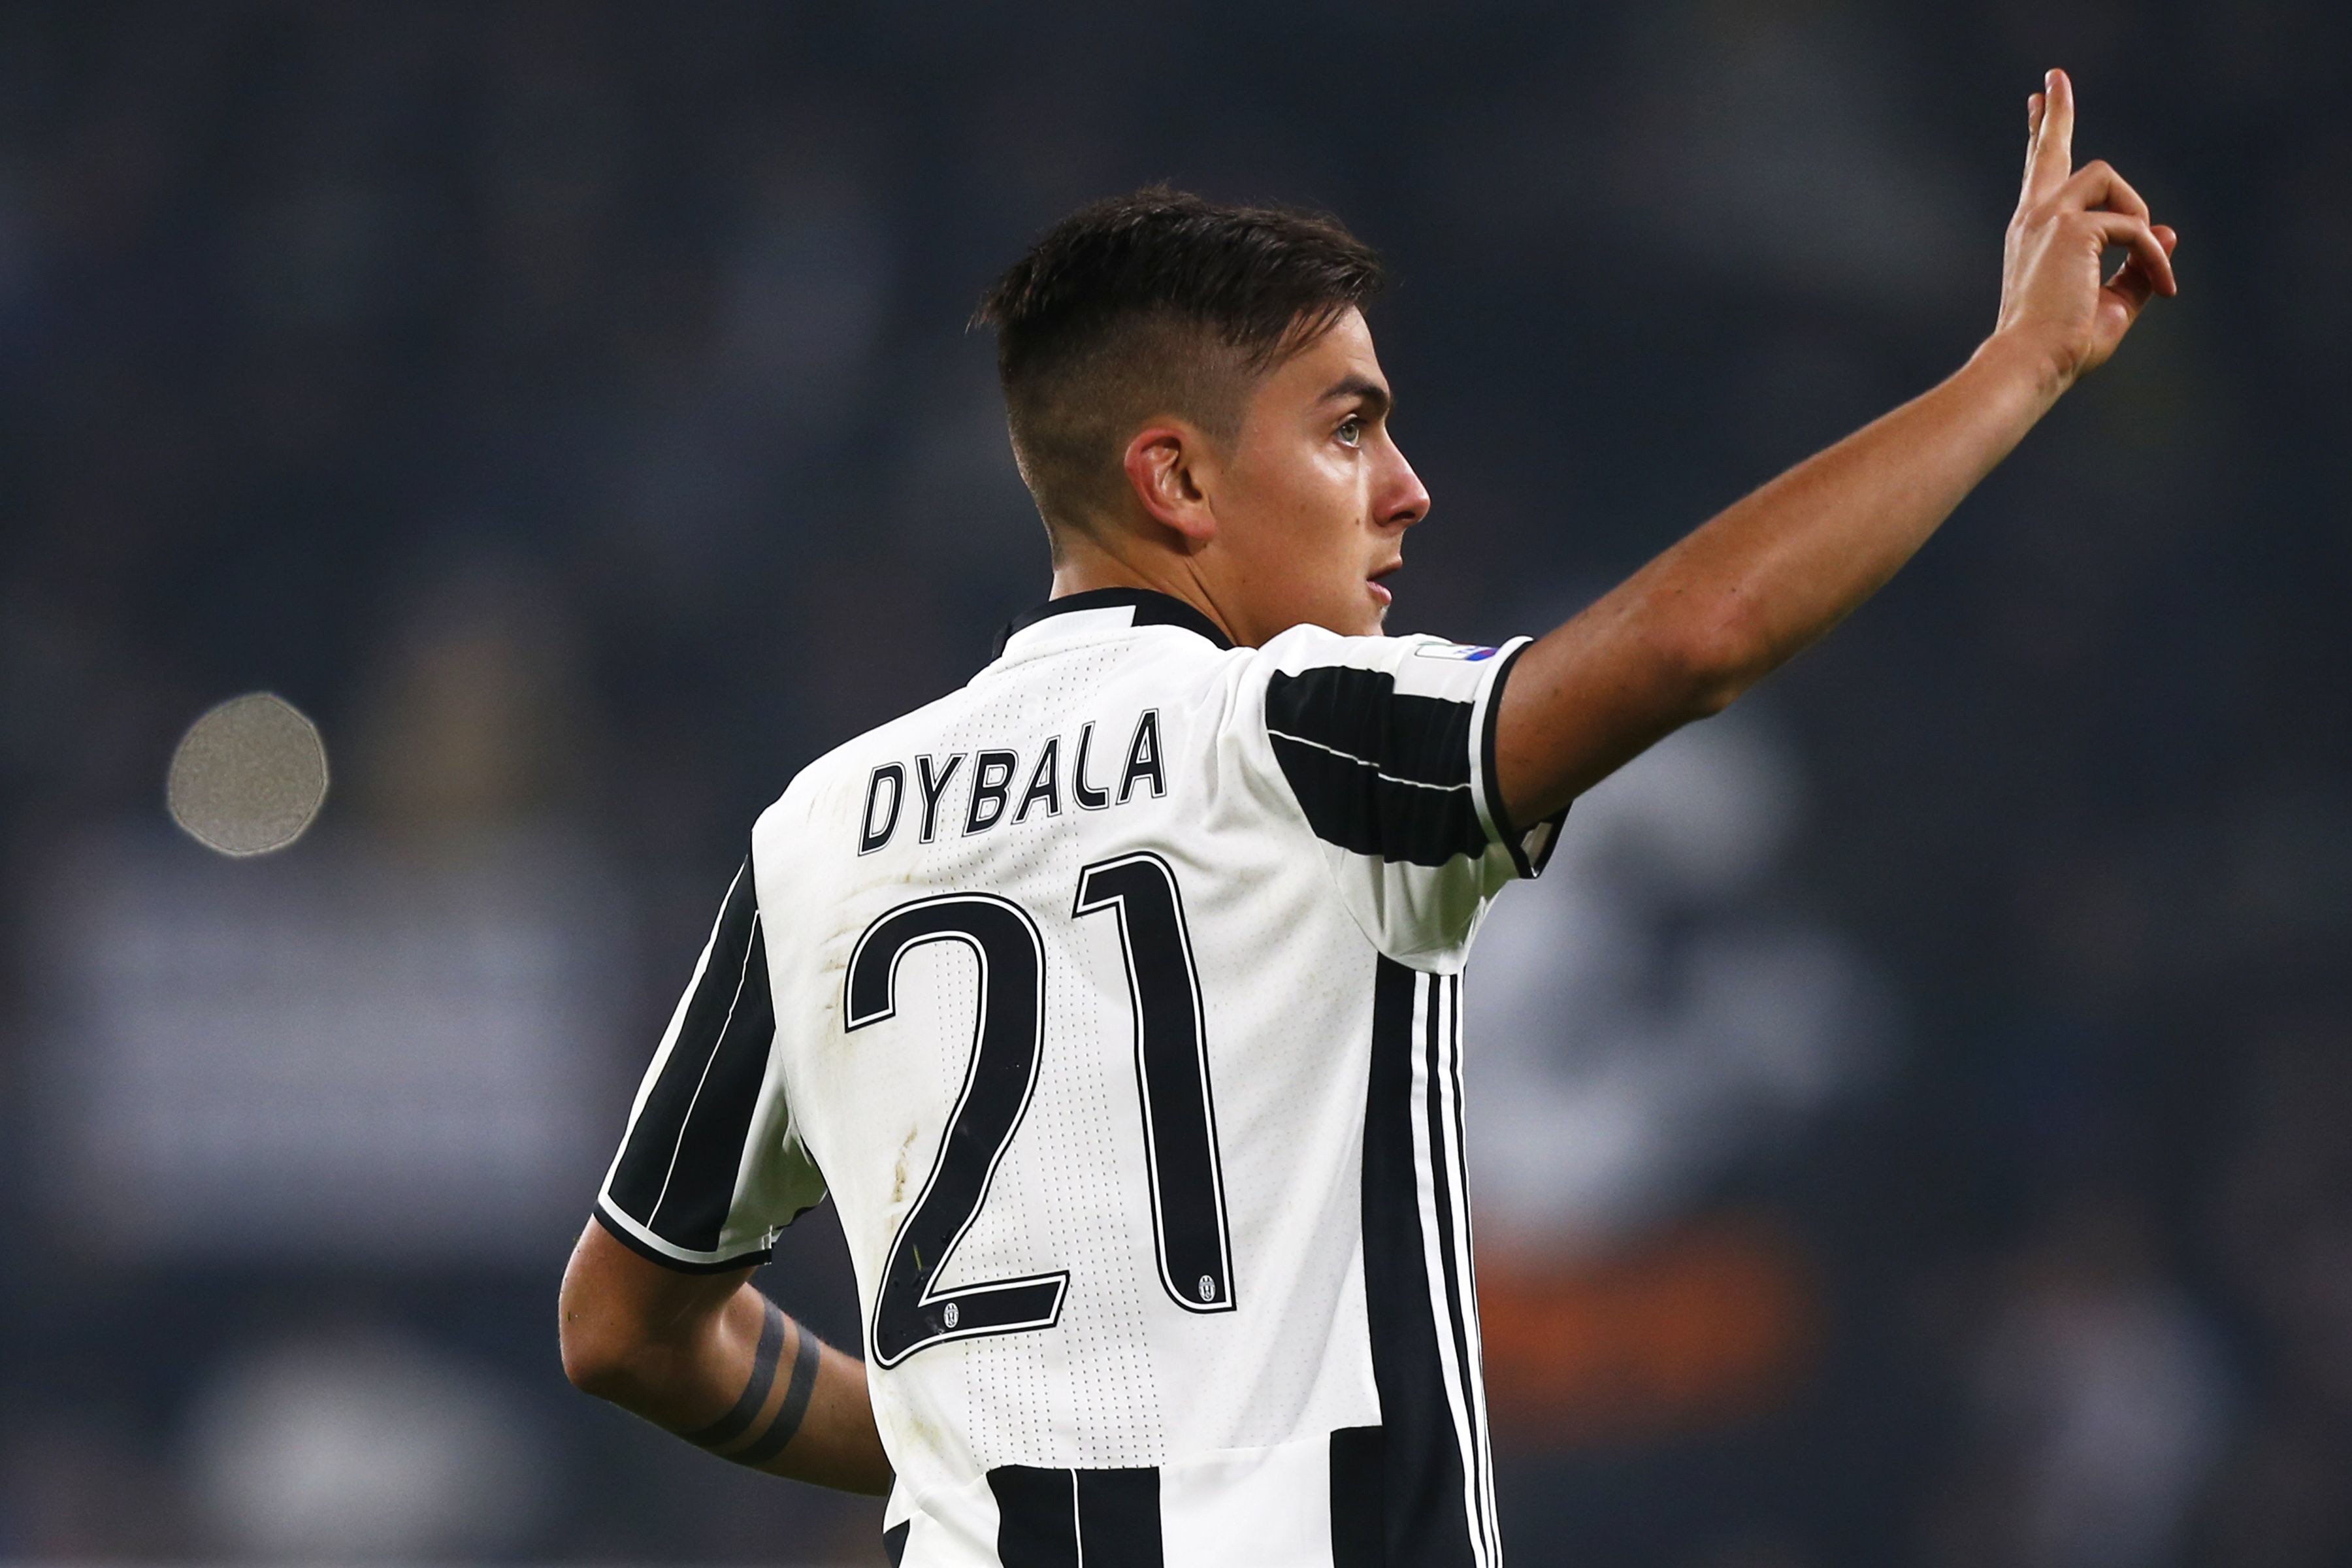 paolo dybala s second half penalty double put holders juventus in control with a 3 1 win over napoli photo afp